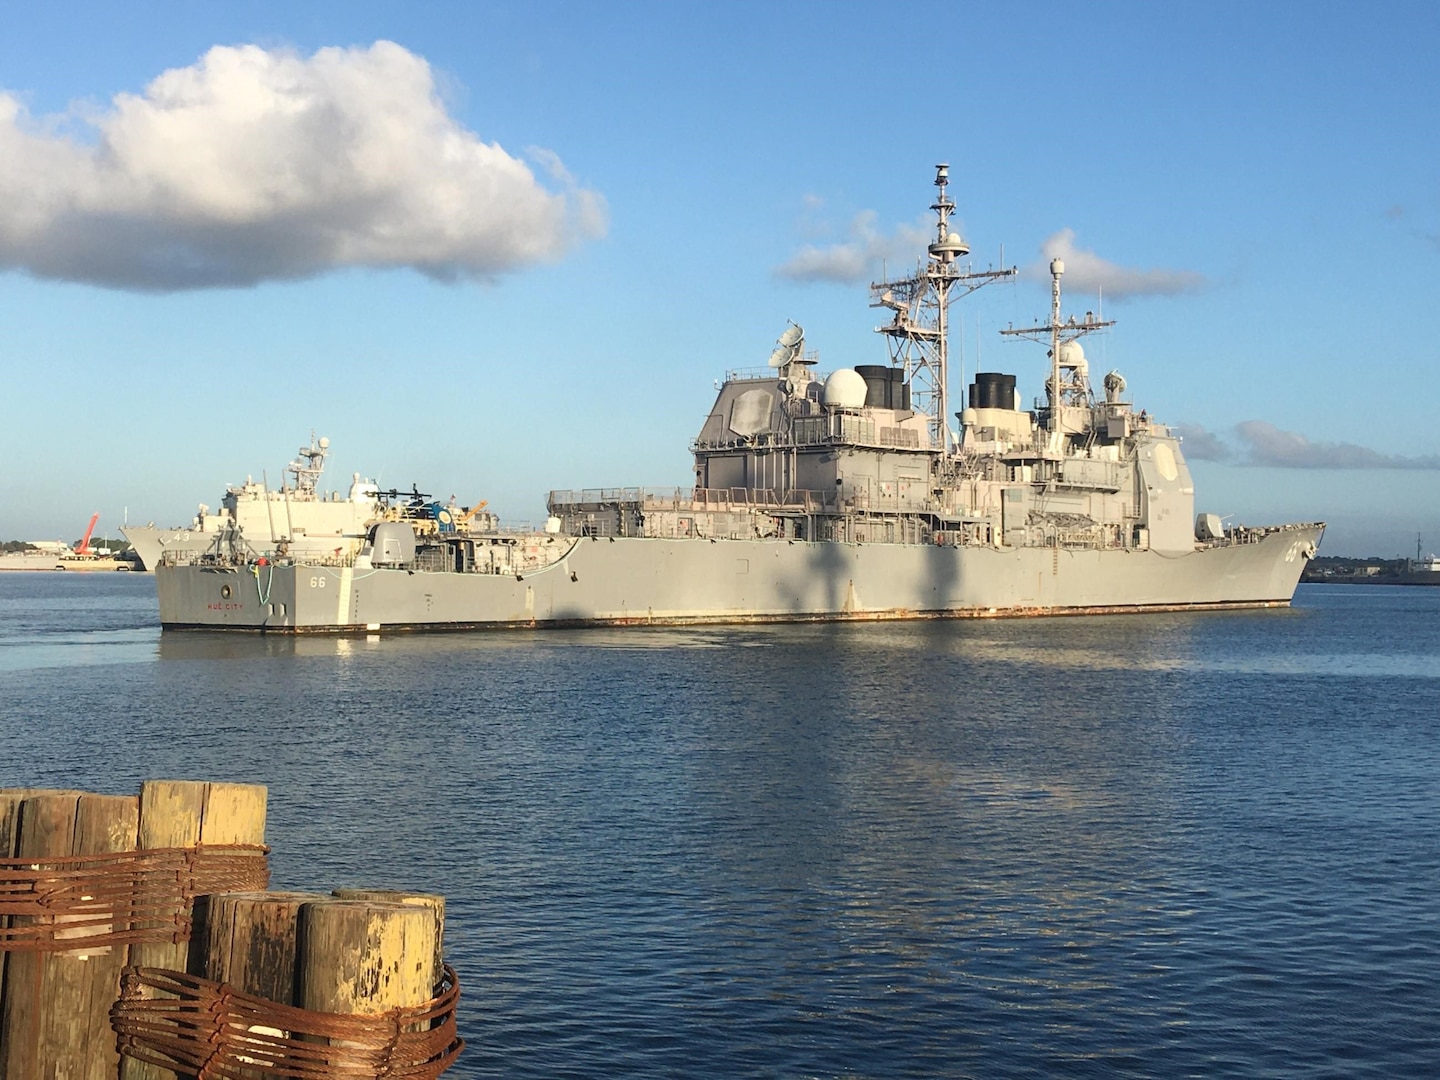 After a quarter-century of worldwide operations, the guided missile cruiser USS Hué City (CG 66) was inducted into the Cruiser Modernization program.